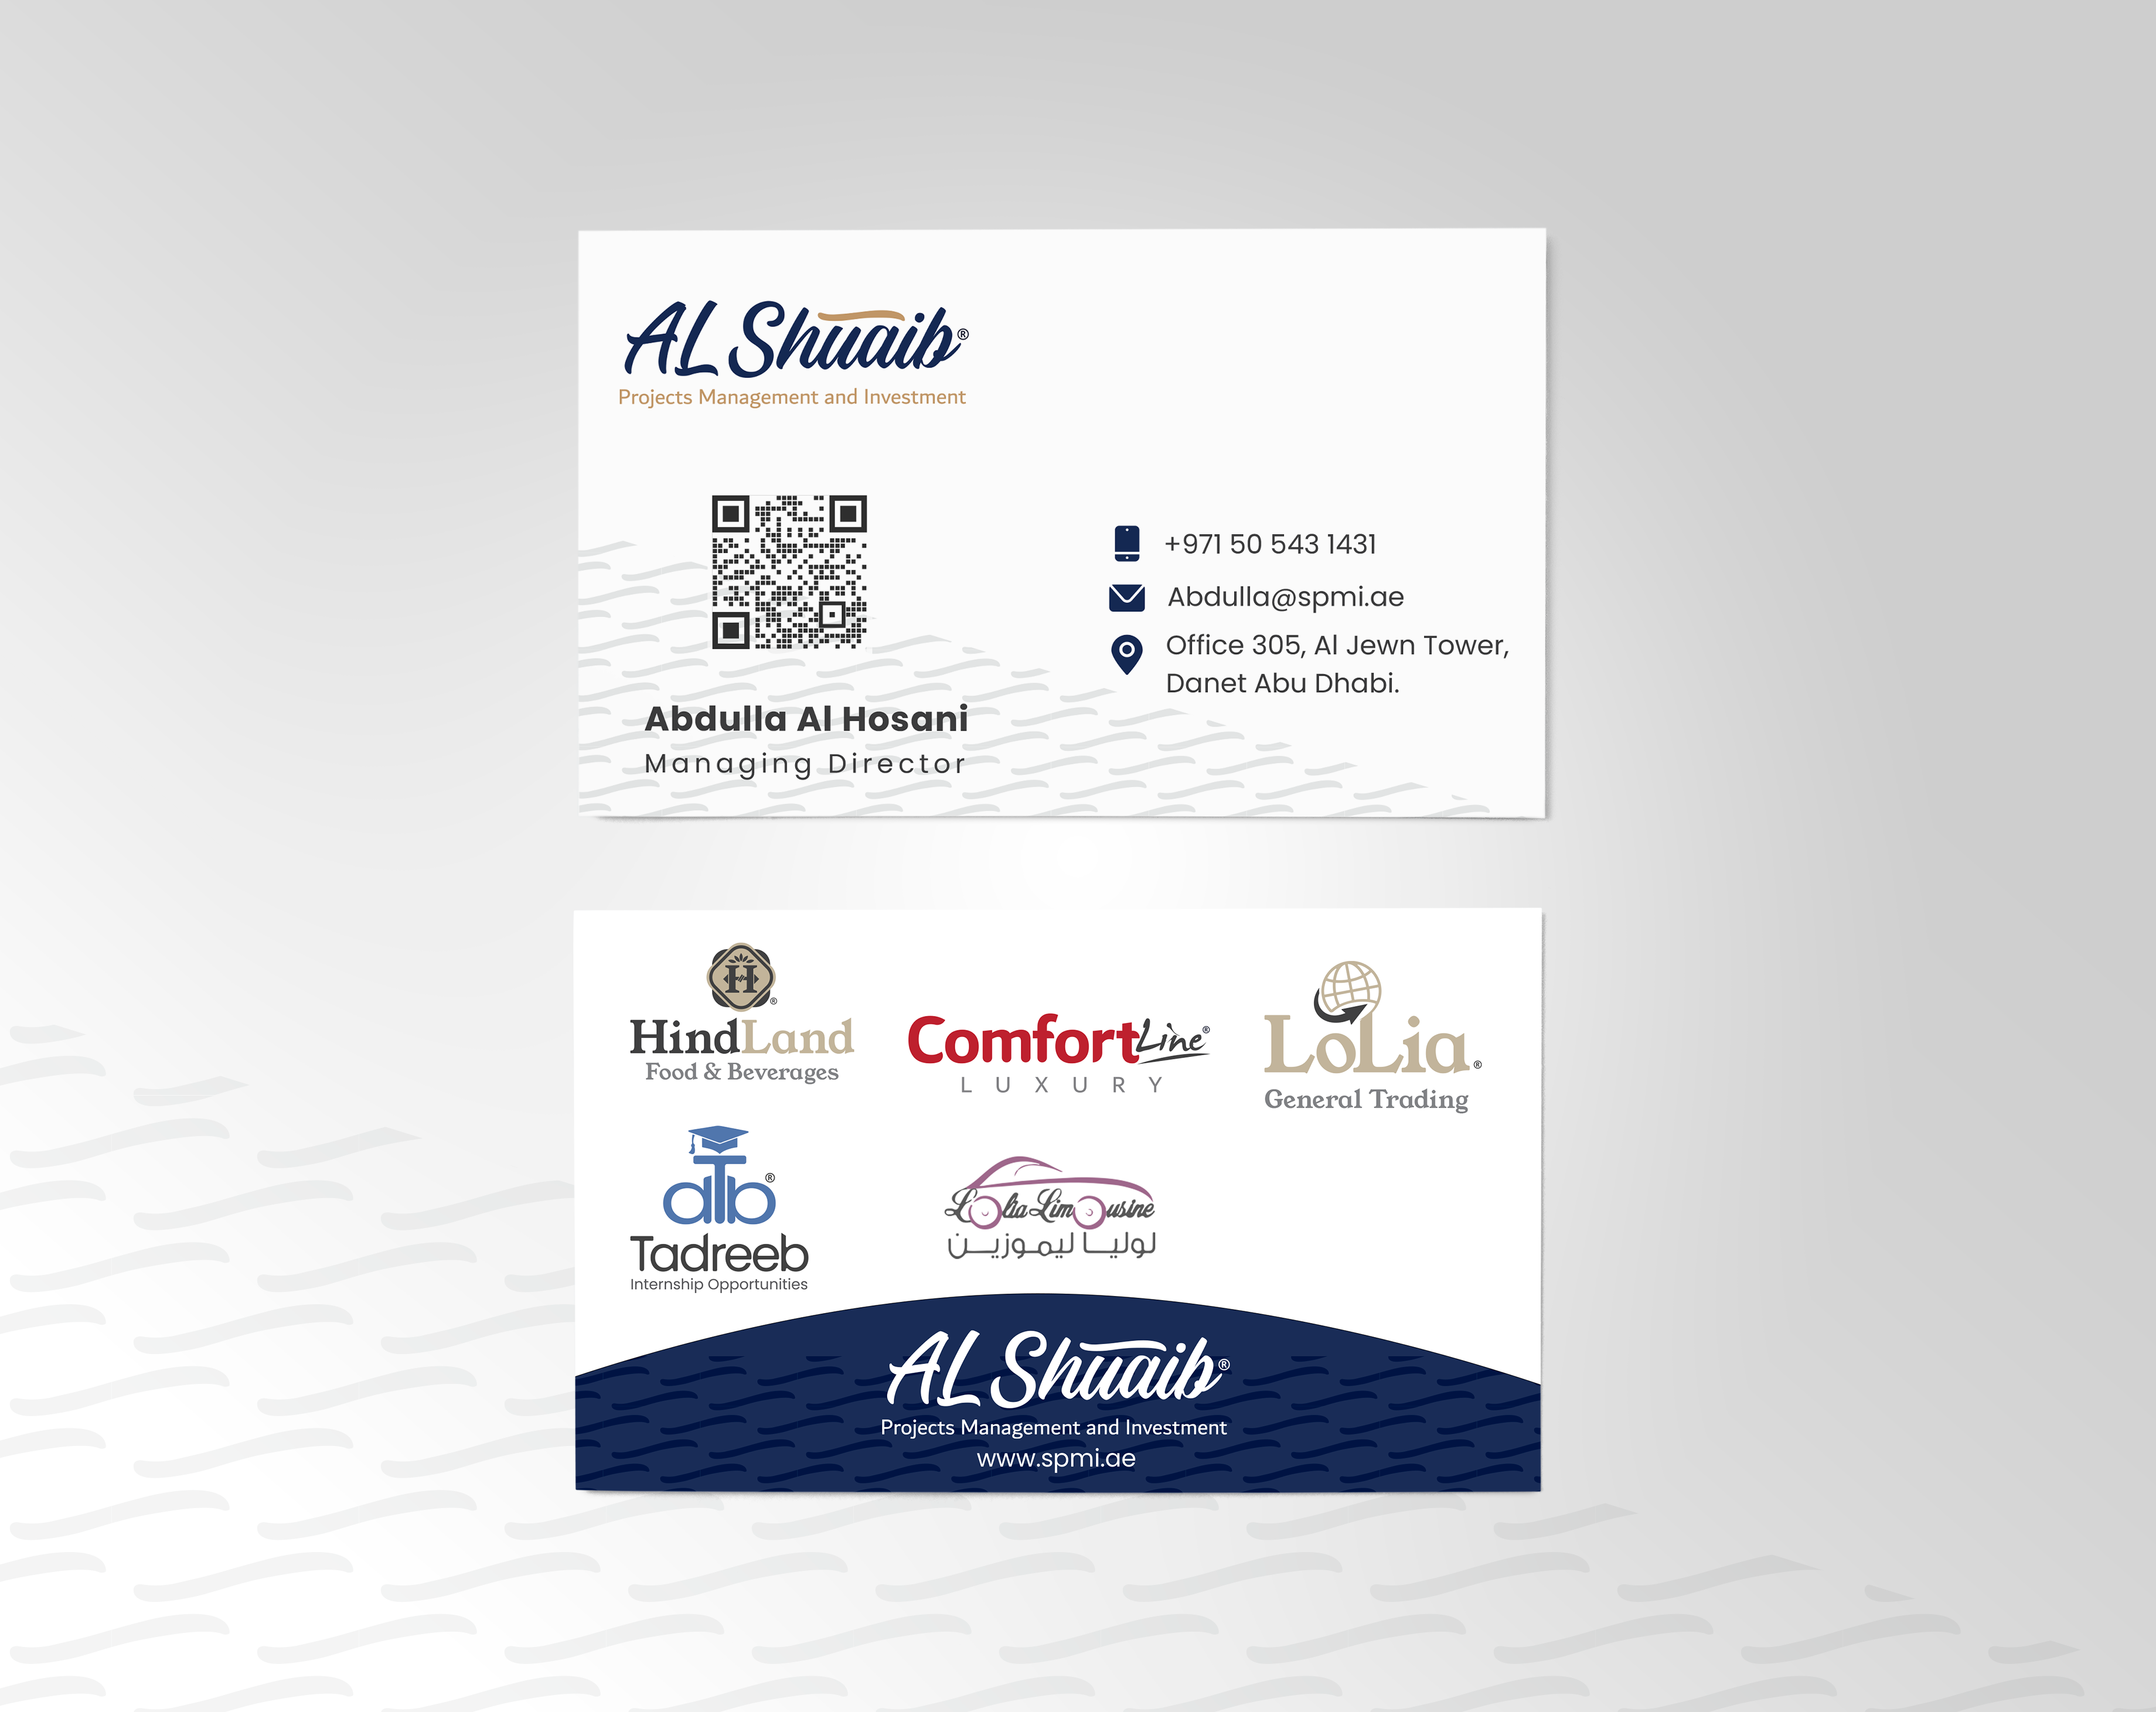 Al Shuaib Projects management & Investment